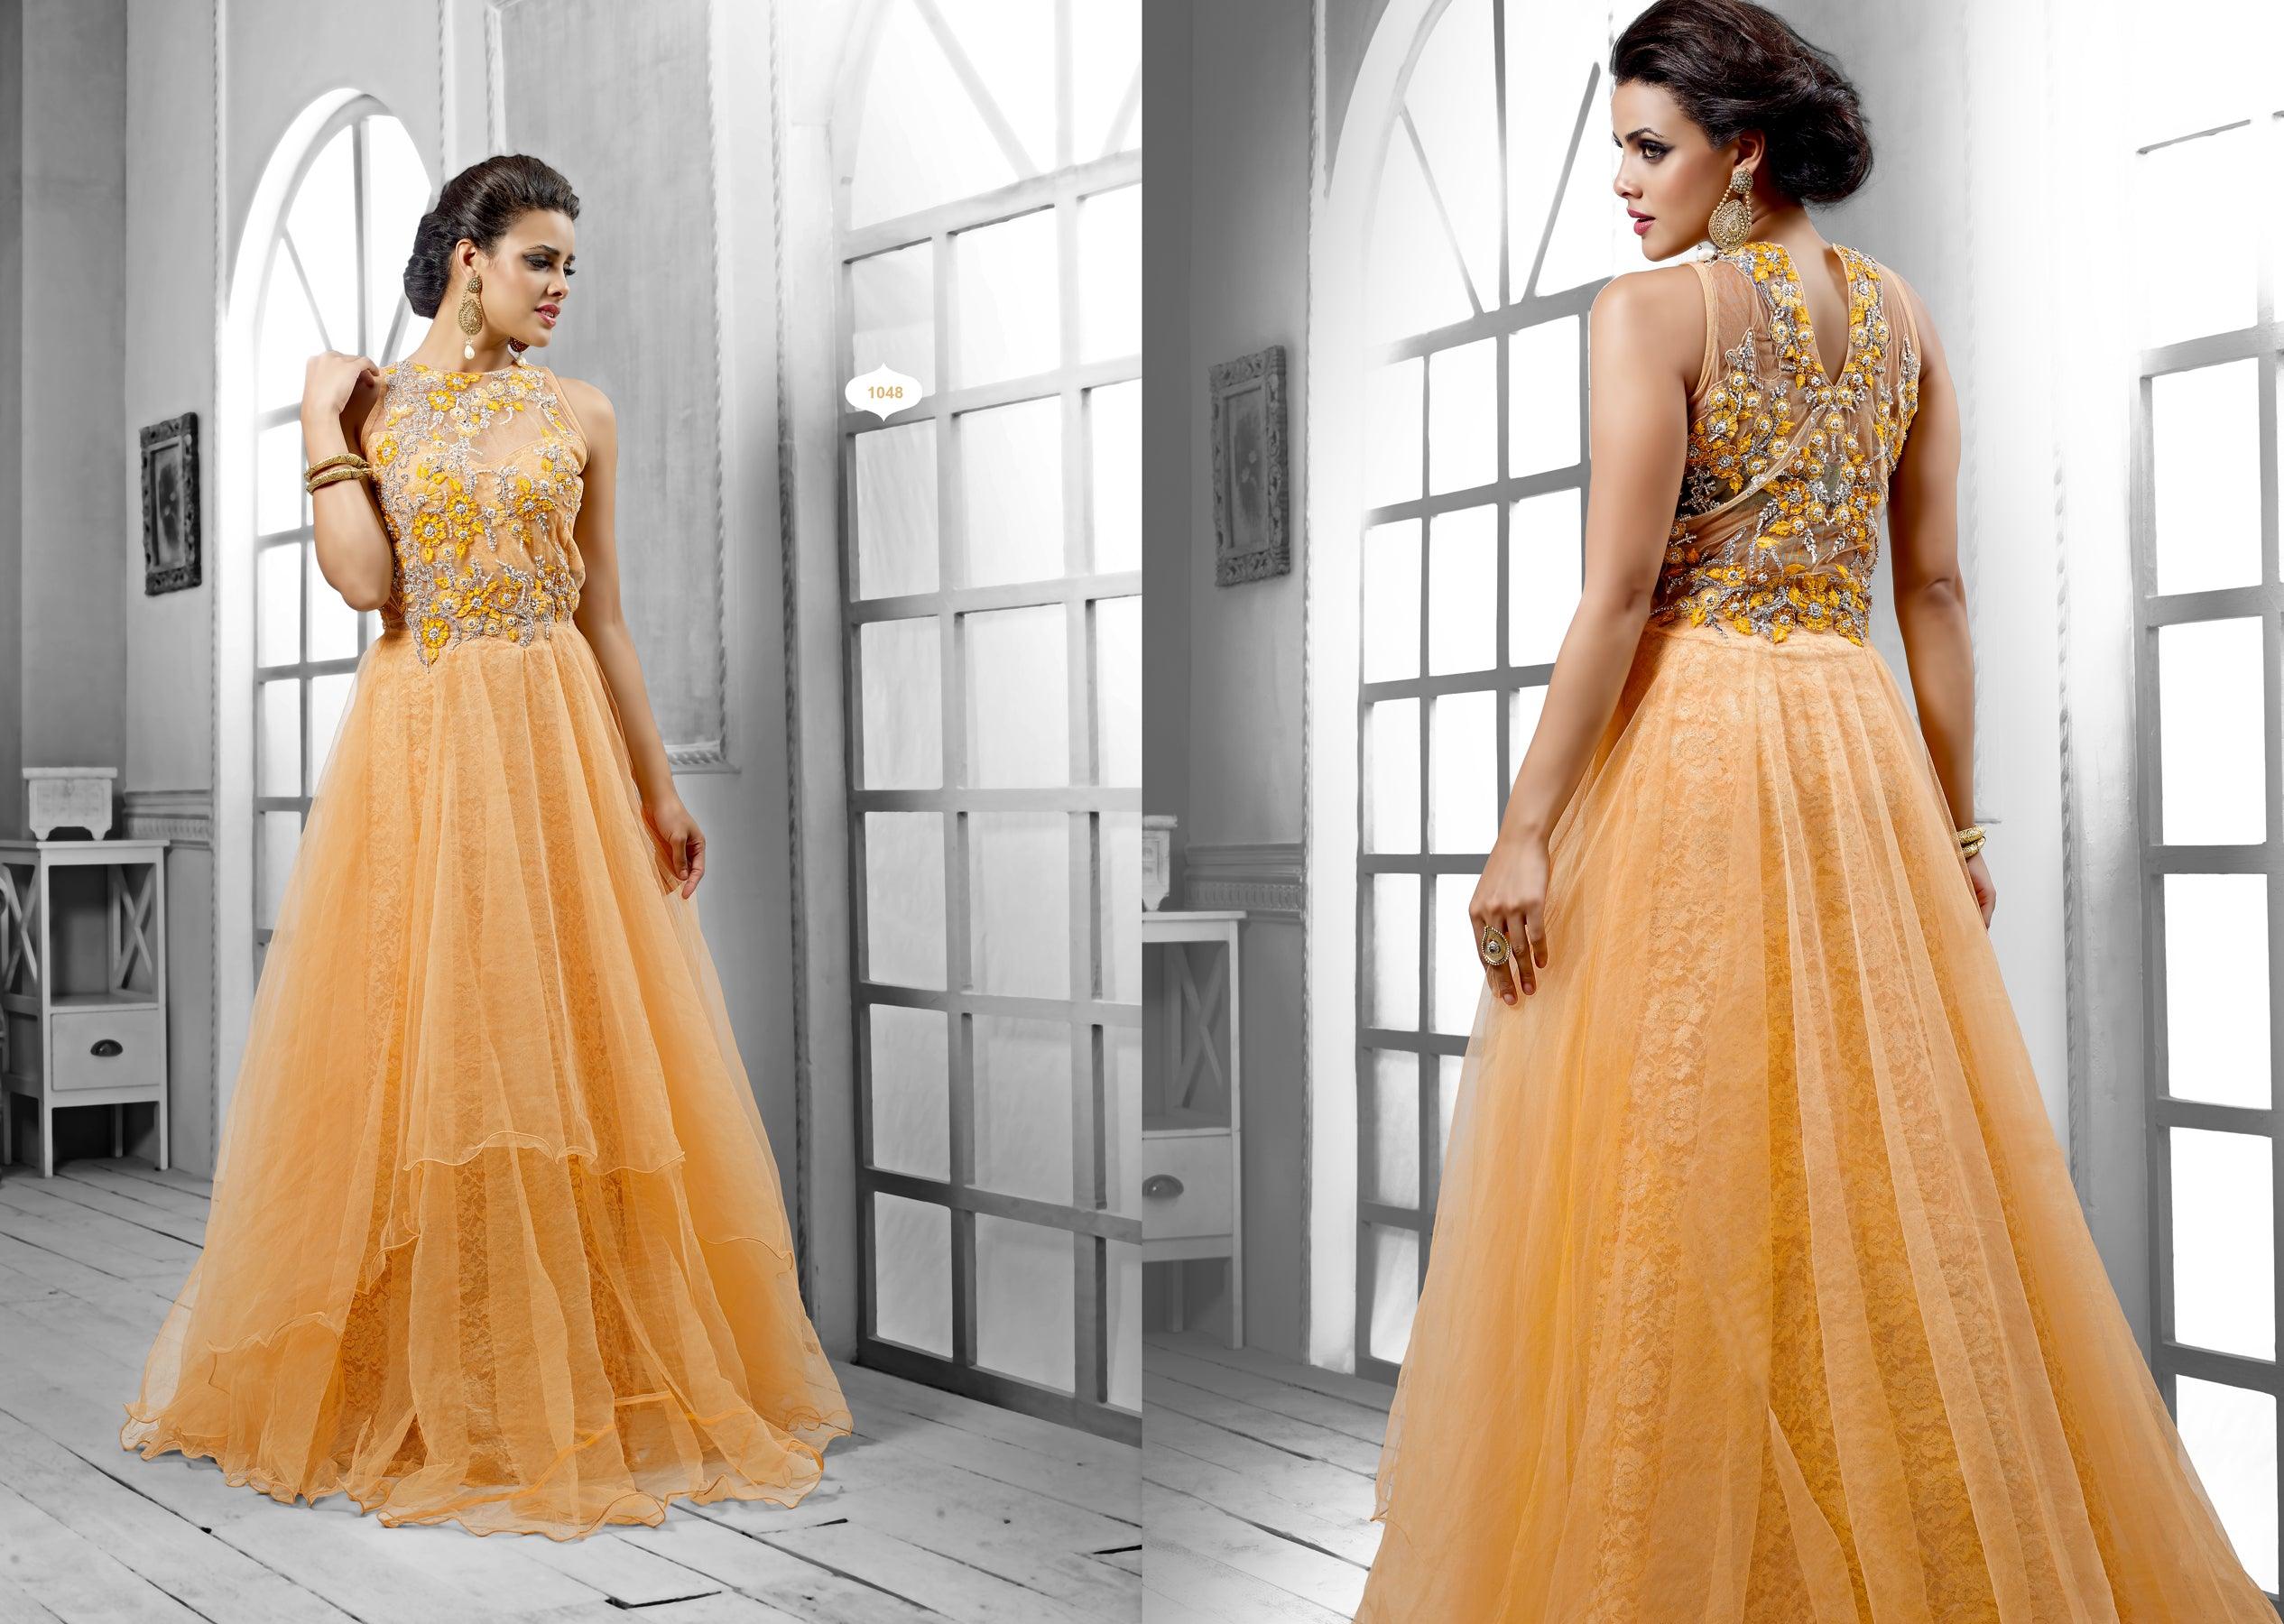 Simple yellow satin long prom dress yellow formal dress · of girl · Online  Store Powered by Storenvy